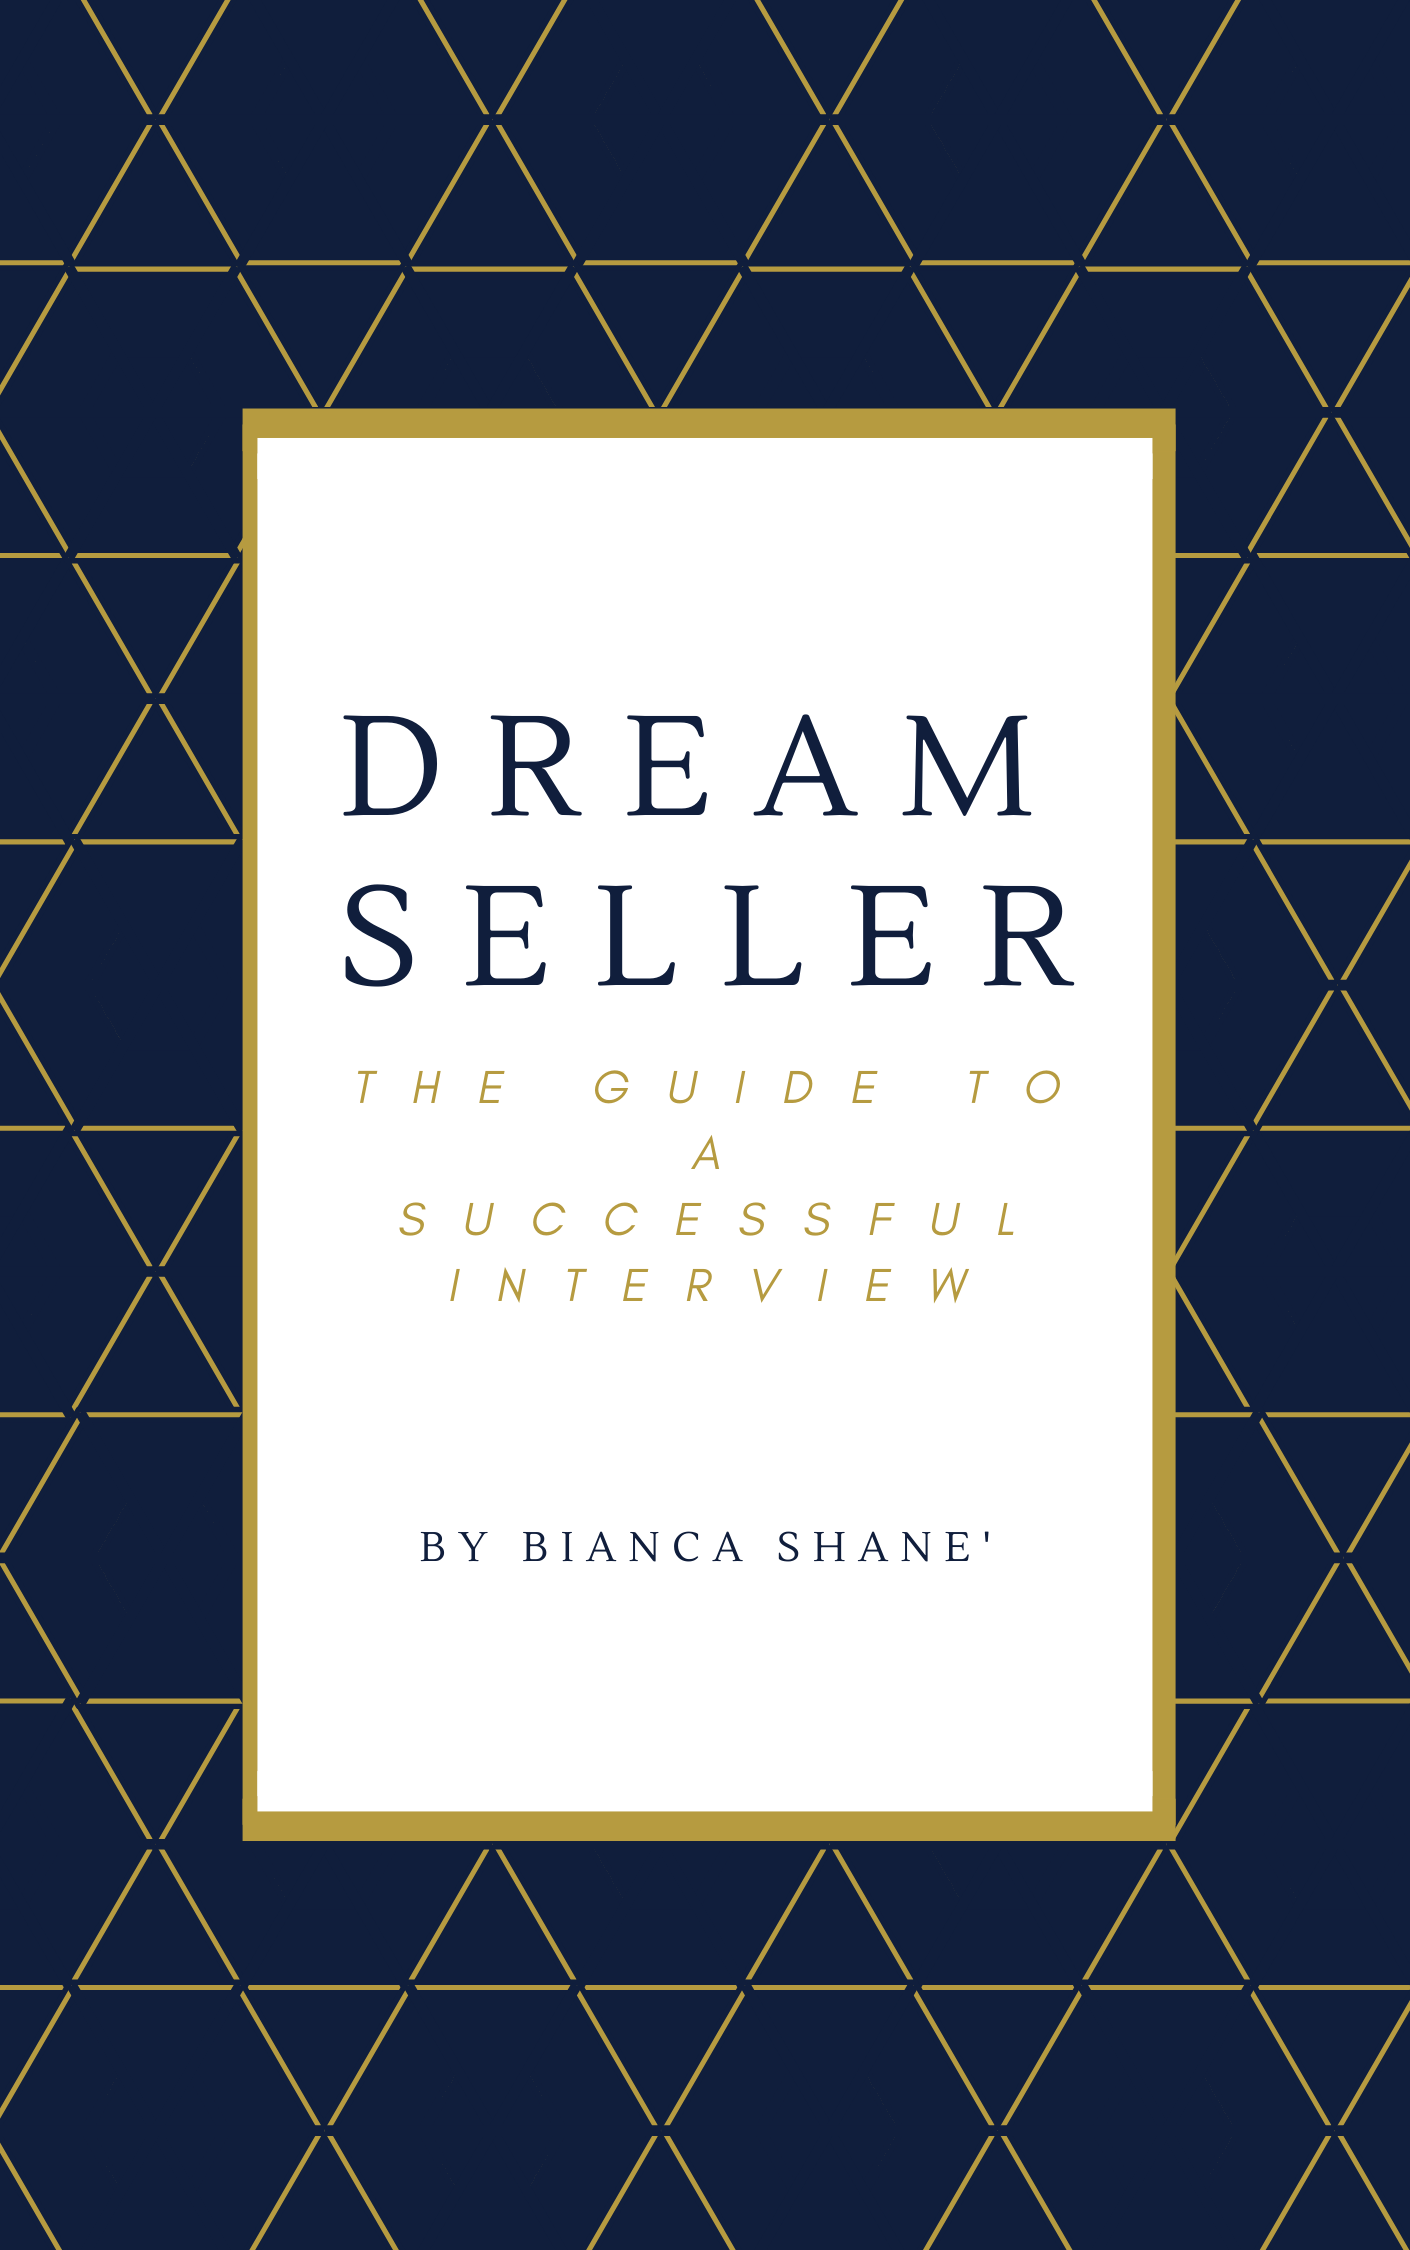 Dream Seller: The Guide to a Successful Interview